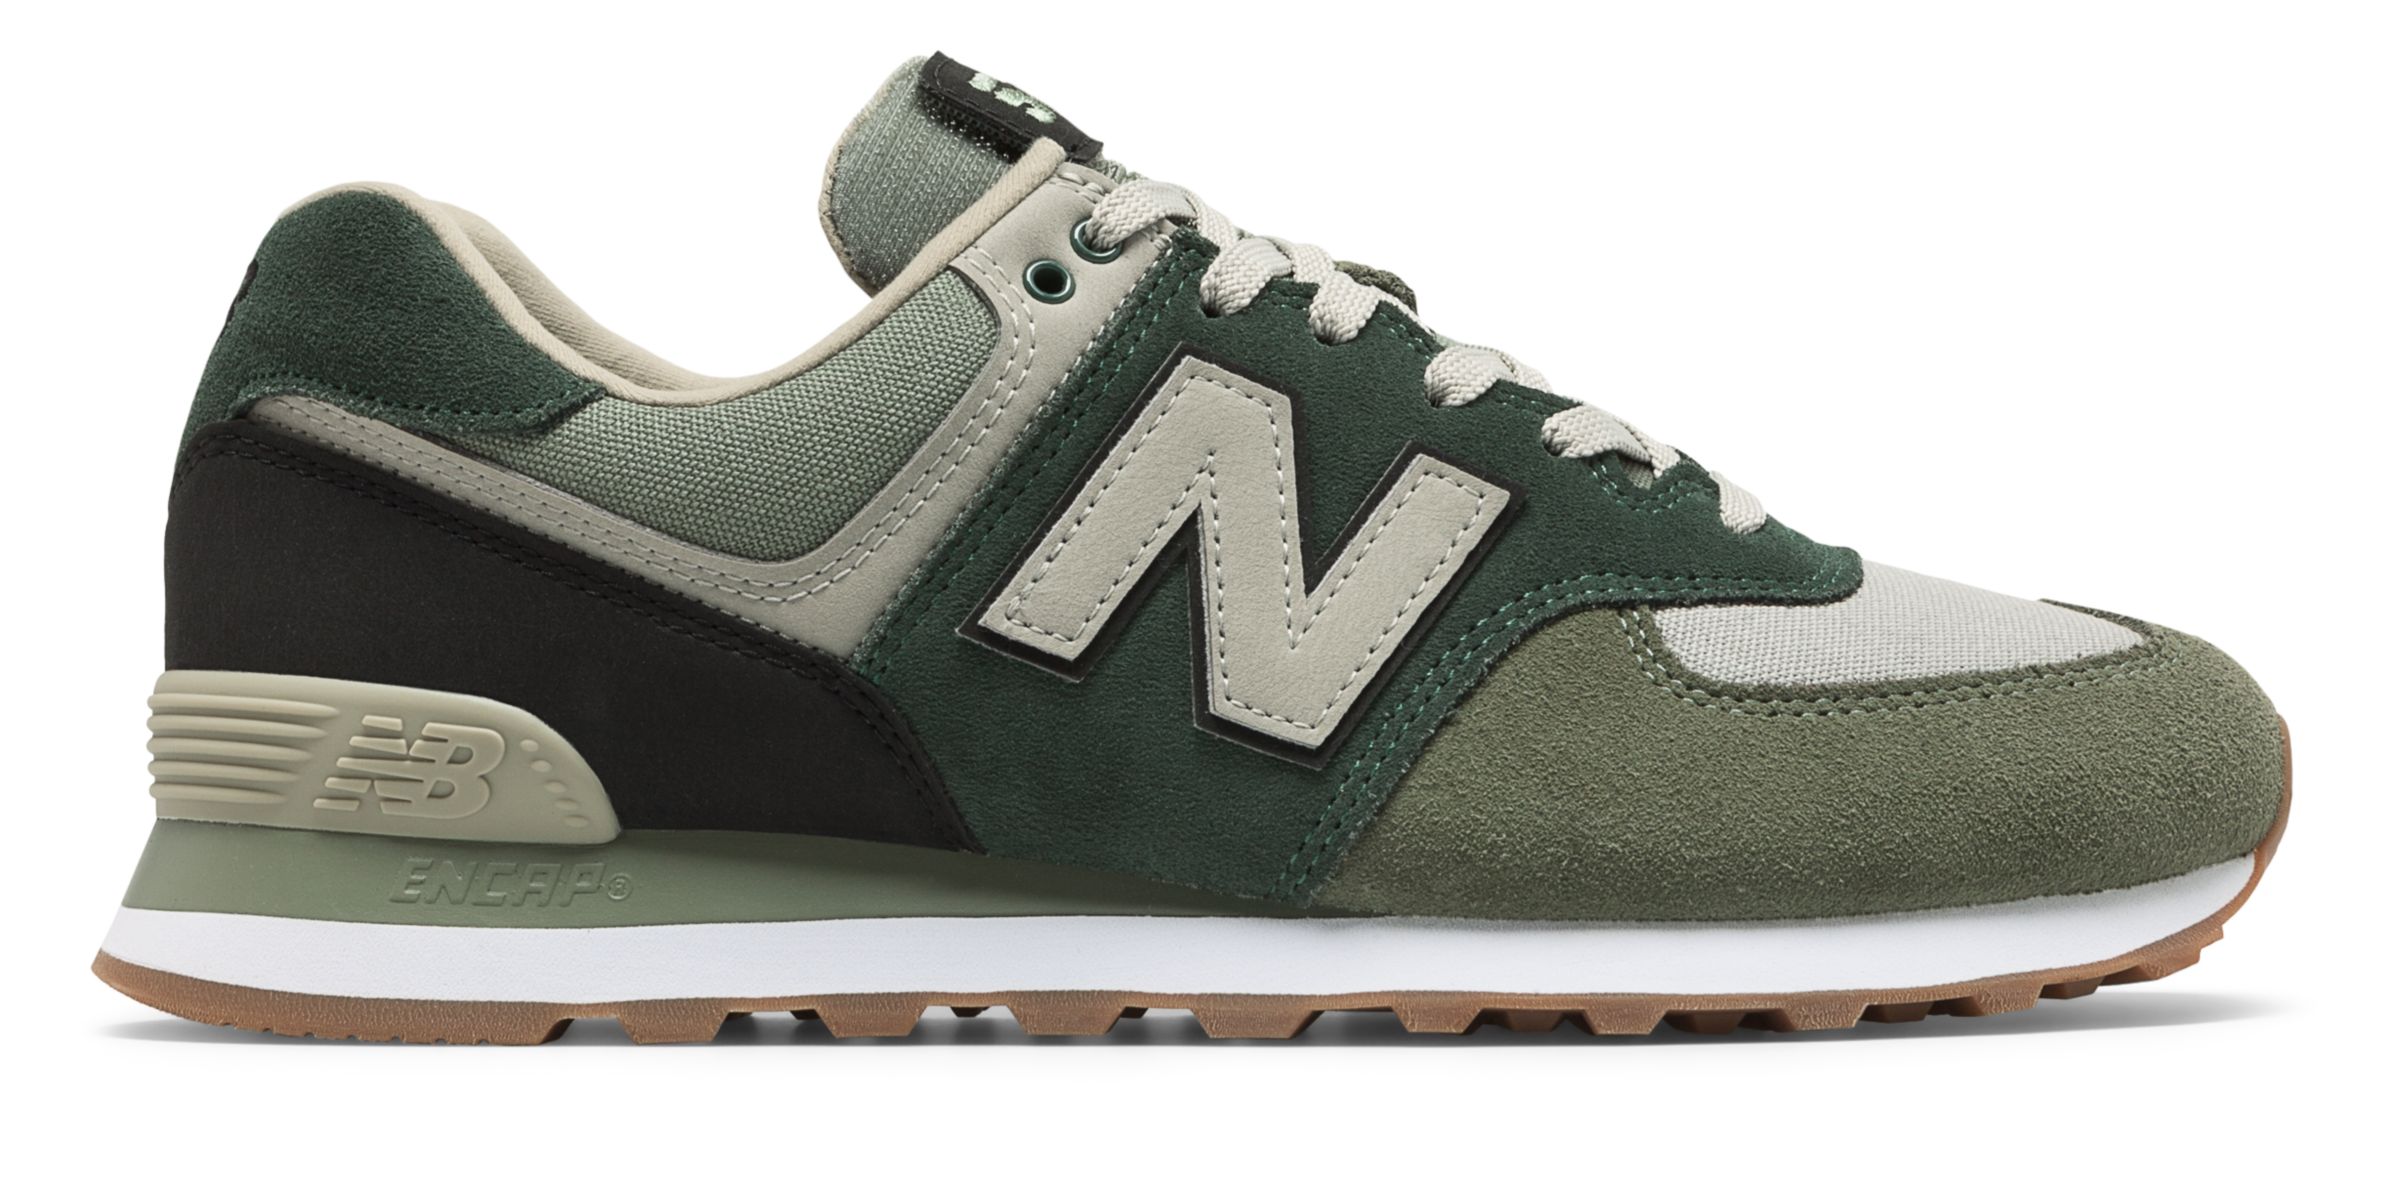 New Balance ML574-V2MP on Sale - Discounts Up to 20% Off on ML574MLD at  Joe's New Balance Outlet